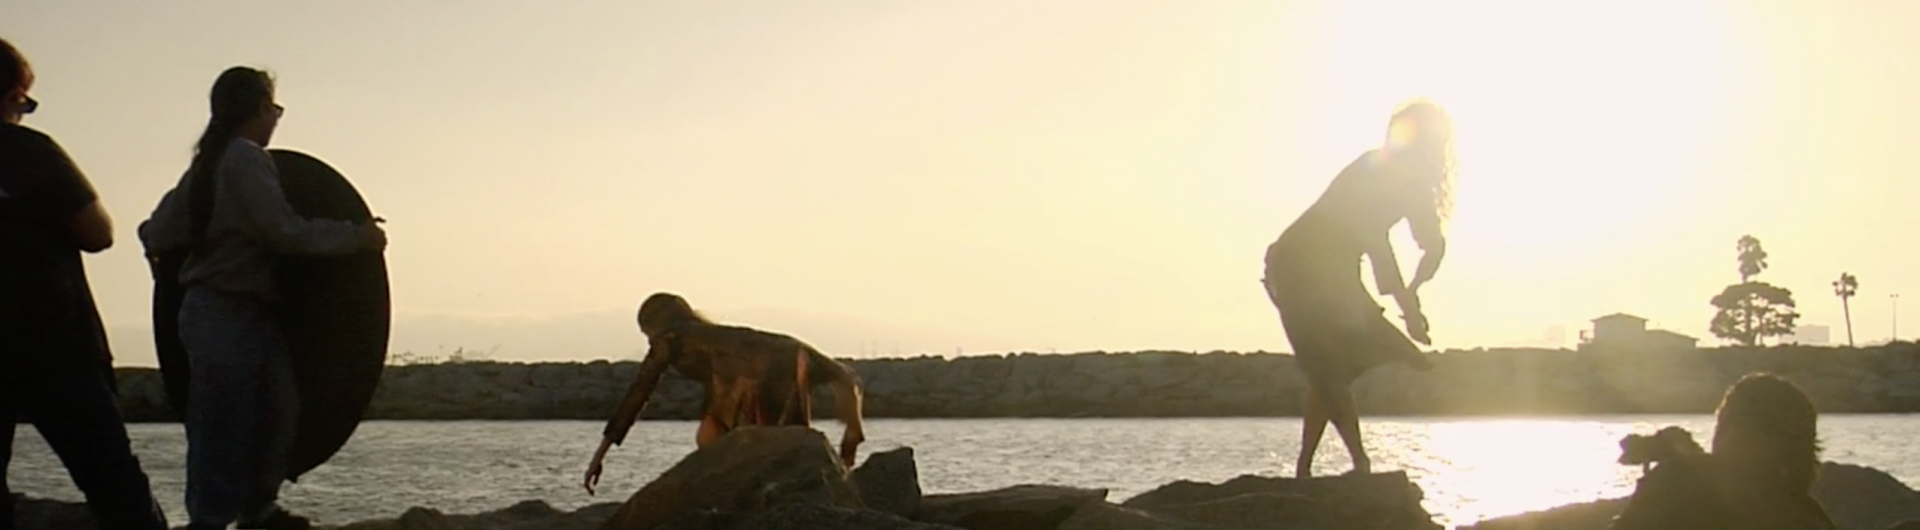 Production still from the Screendance "Aprés". Silhouette of dancers on a jetty during sunset.